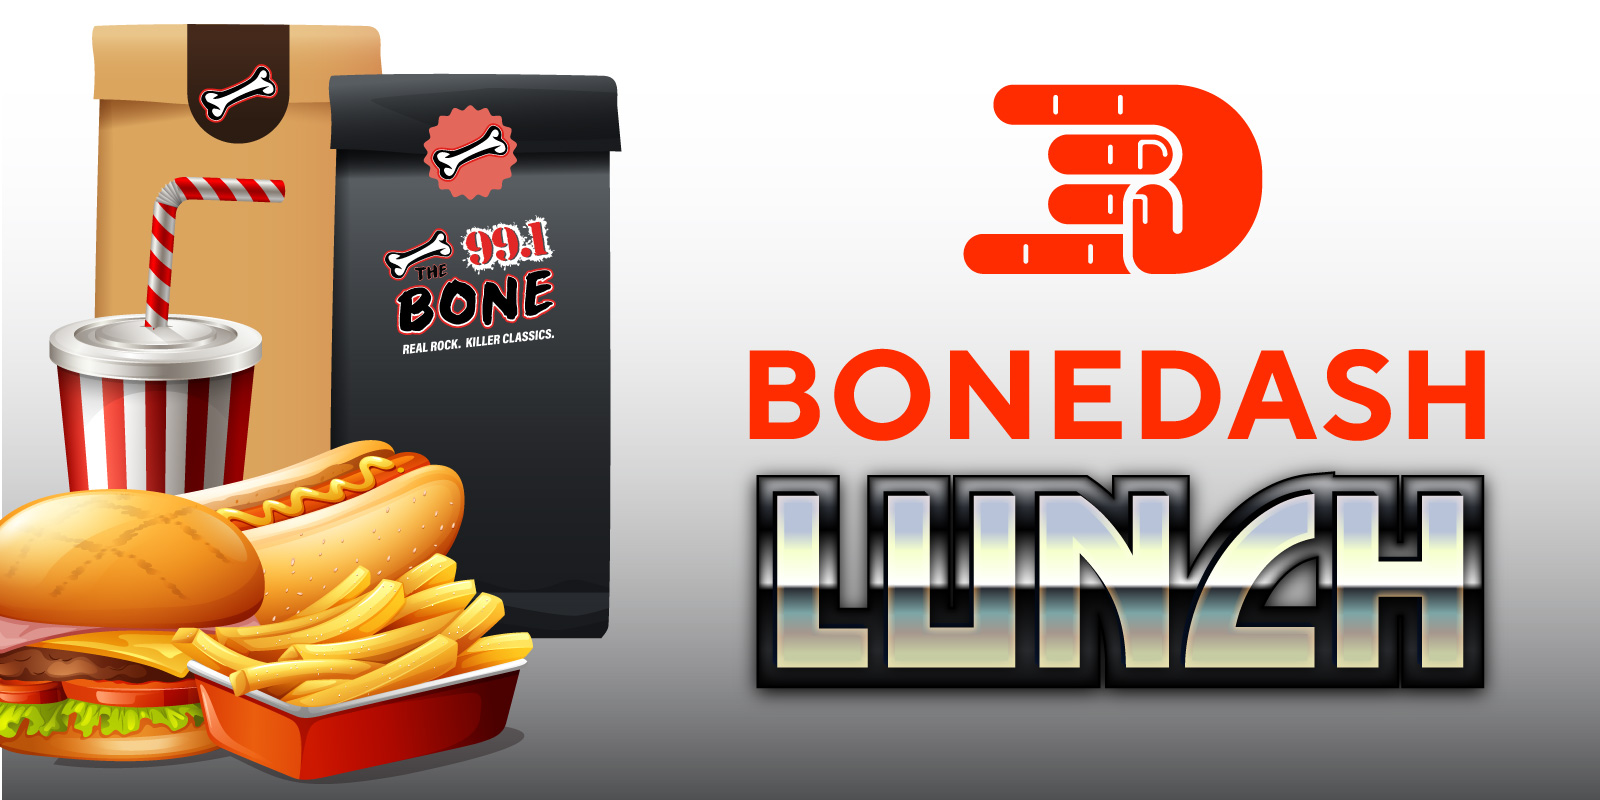 The BoneDash Lunch – Your Requests All Hour Long